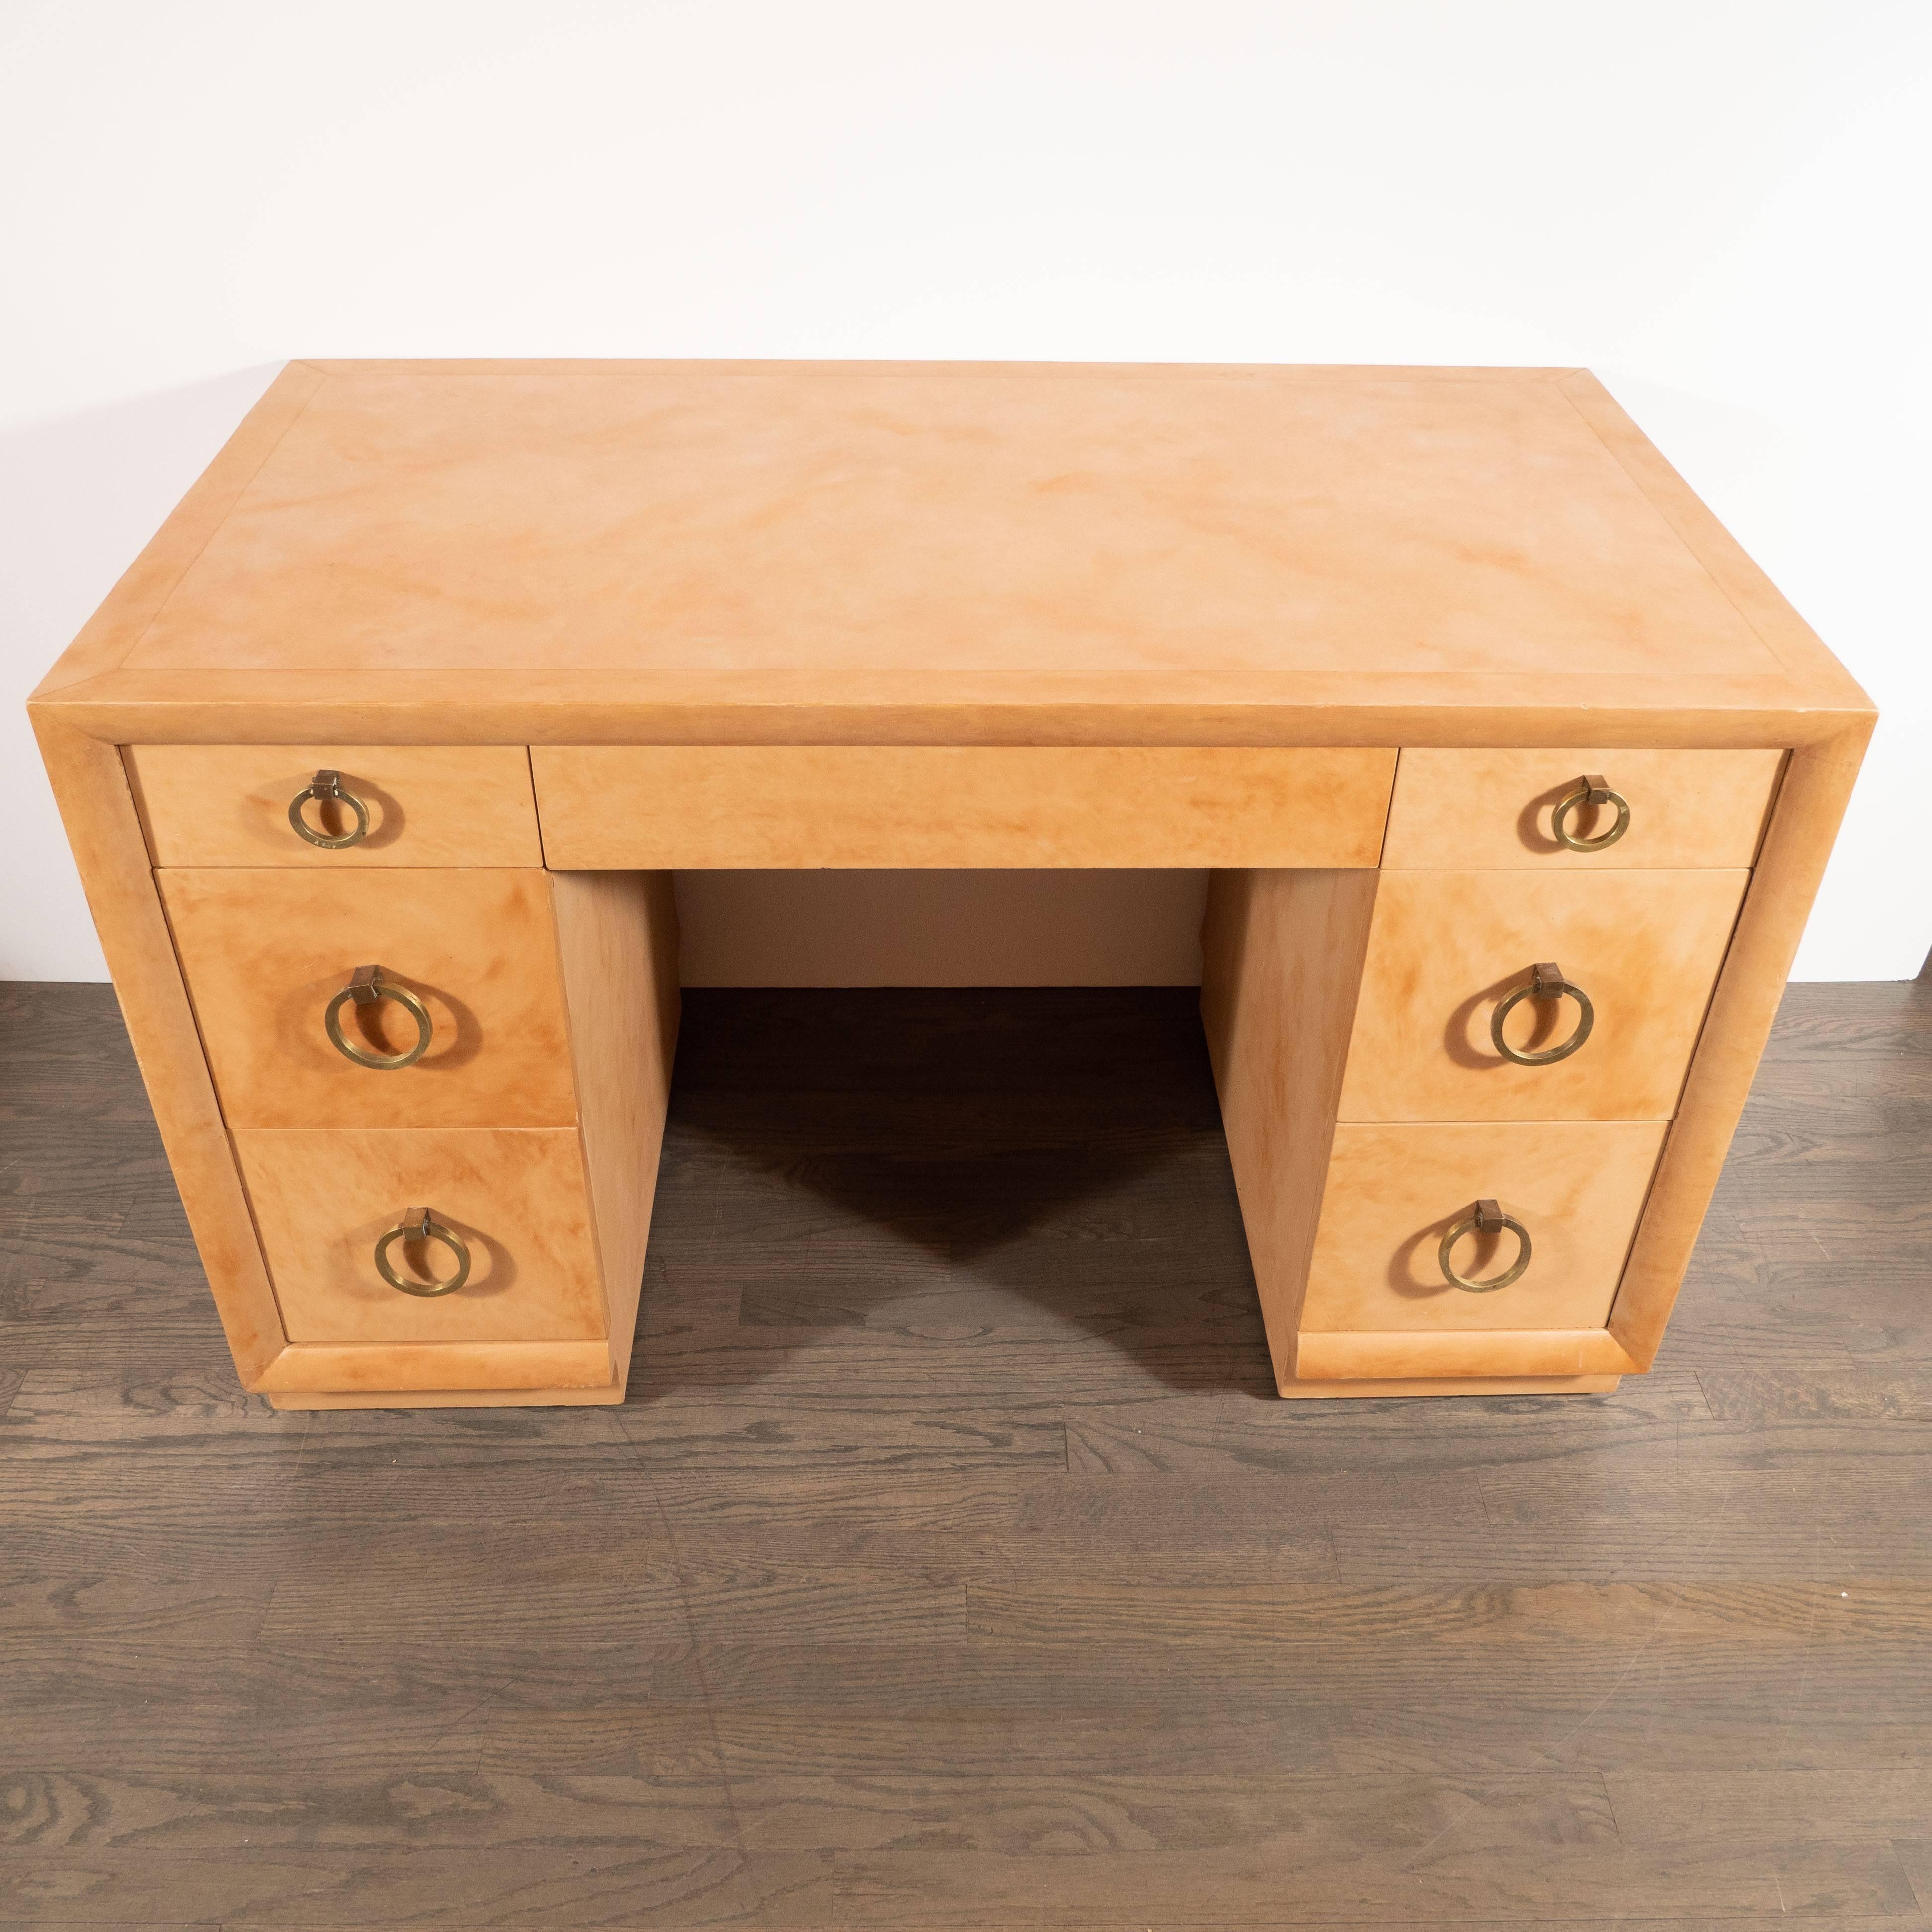 American Mid-Century Modern Parchment Desk with Circular Brass Pulls by Robsjohn-Gibbings